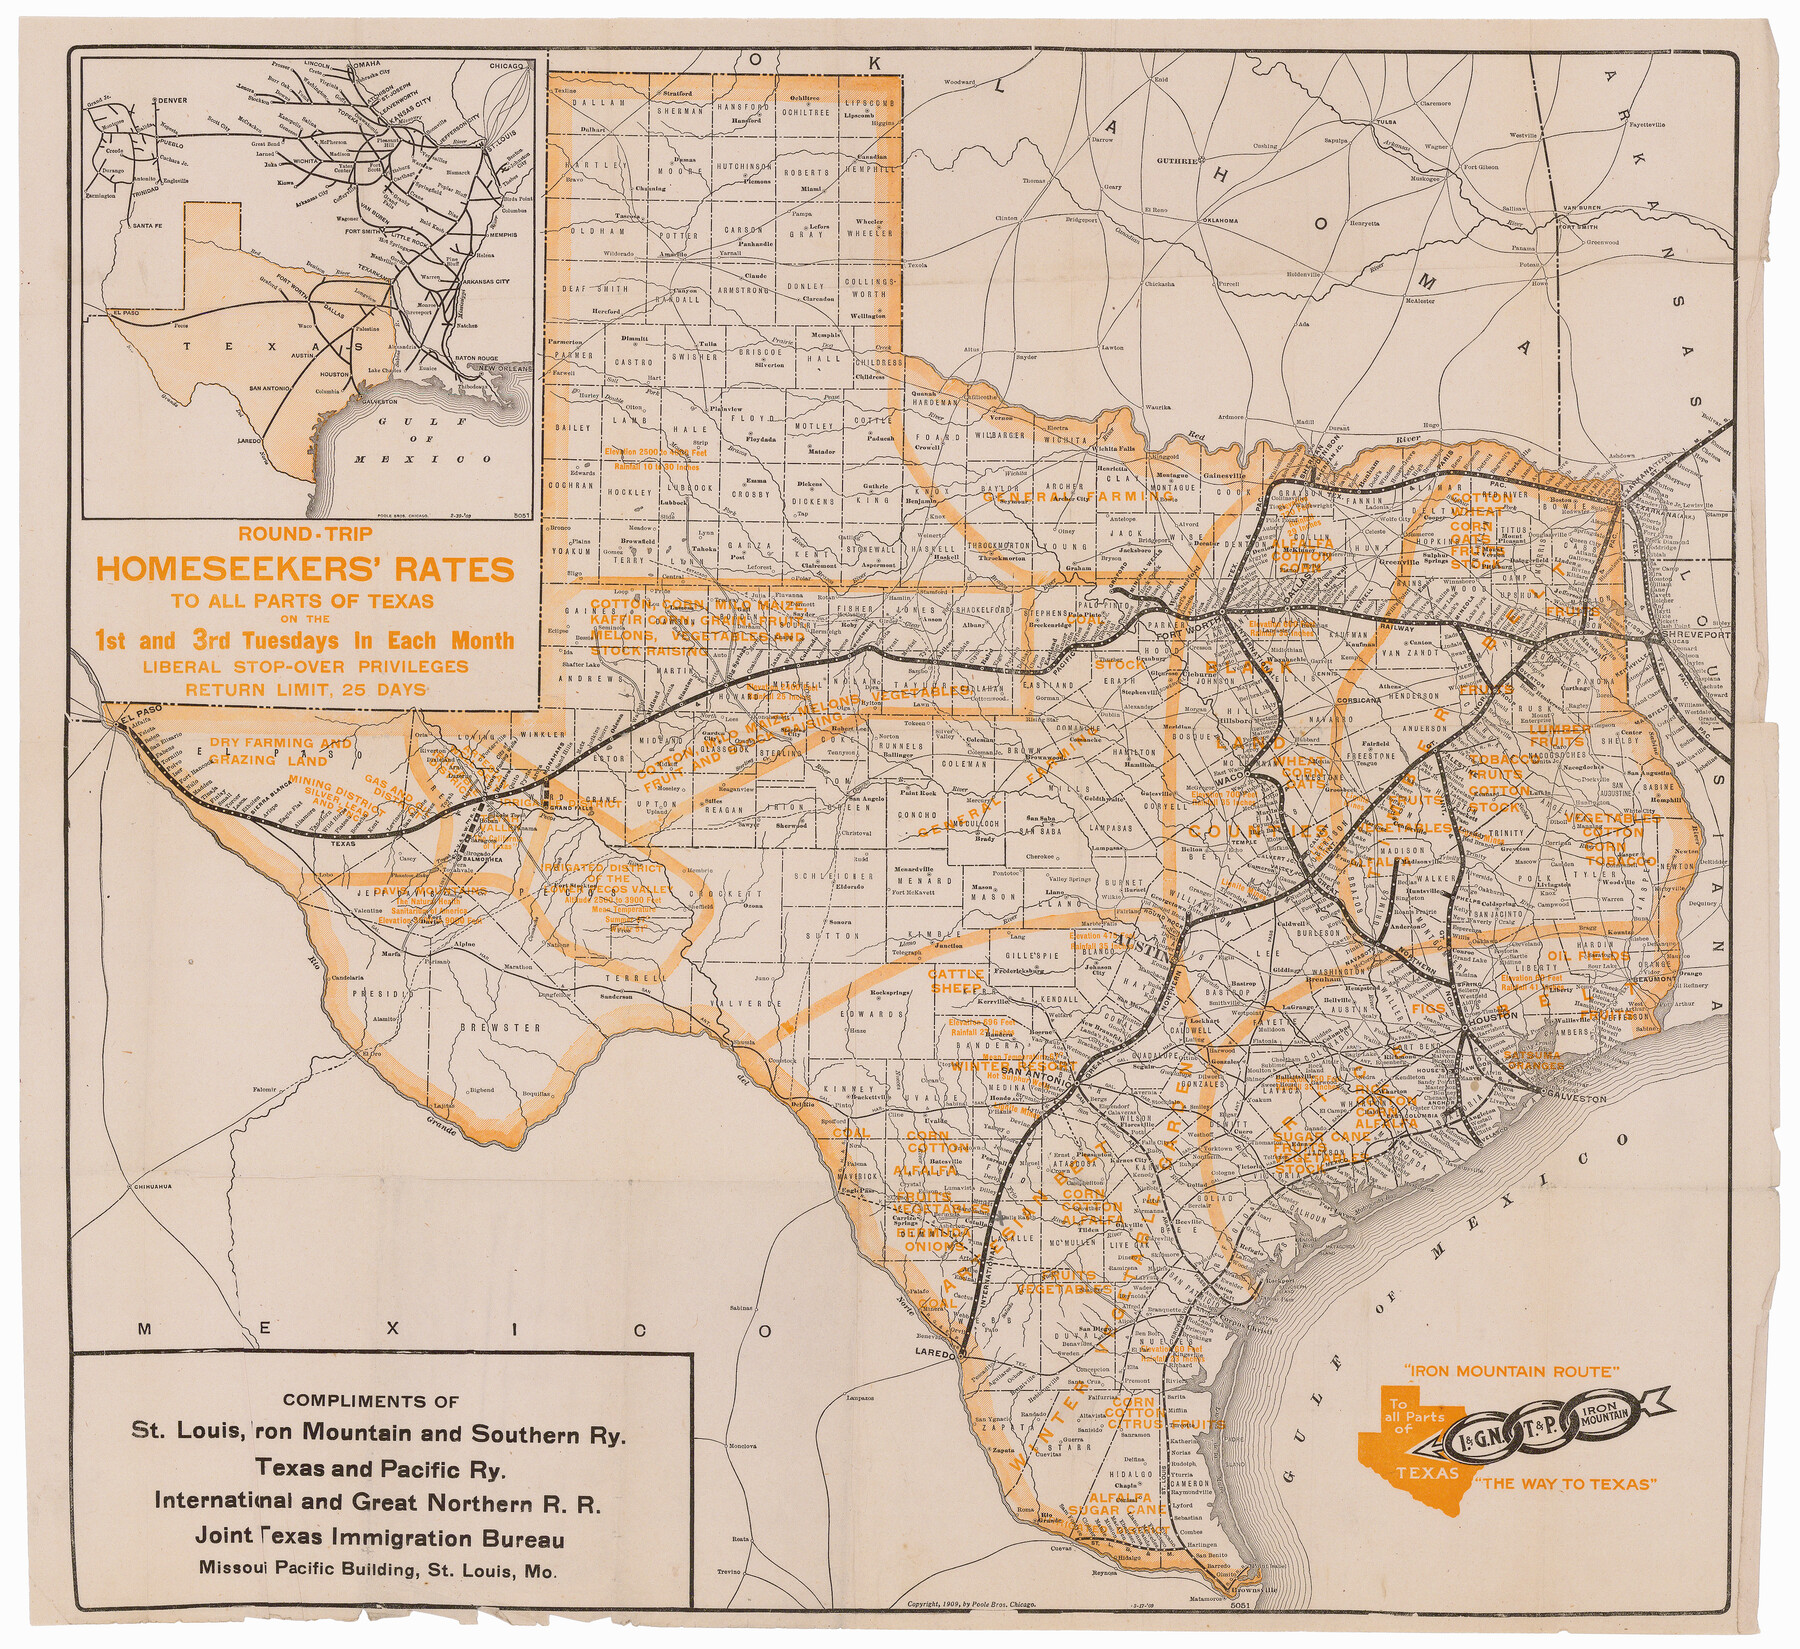 95792, "Iron Mountain Route" to all parts of Texas - I. & G. N., T. & P., Iron Mountain - "The Way to Texas", Cobb Digital Map Collection